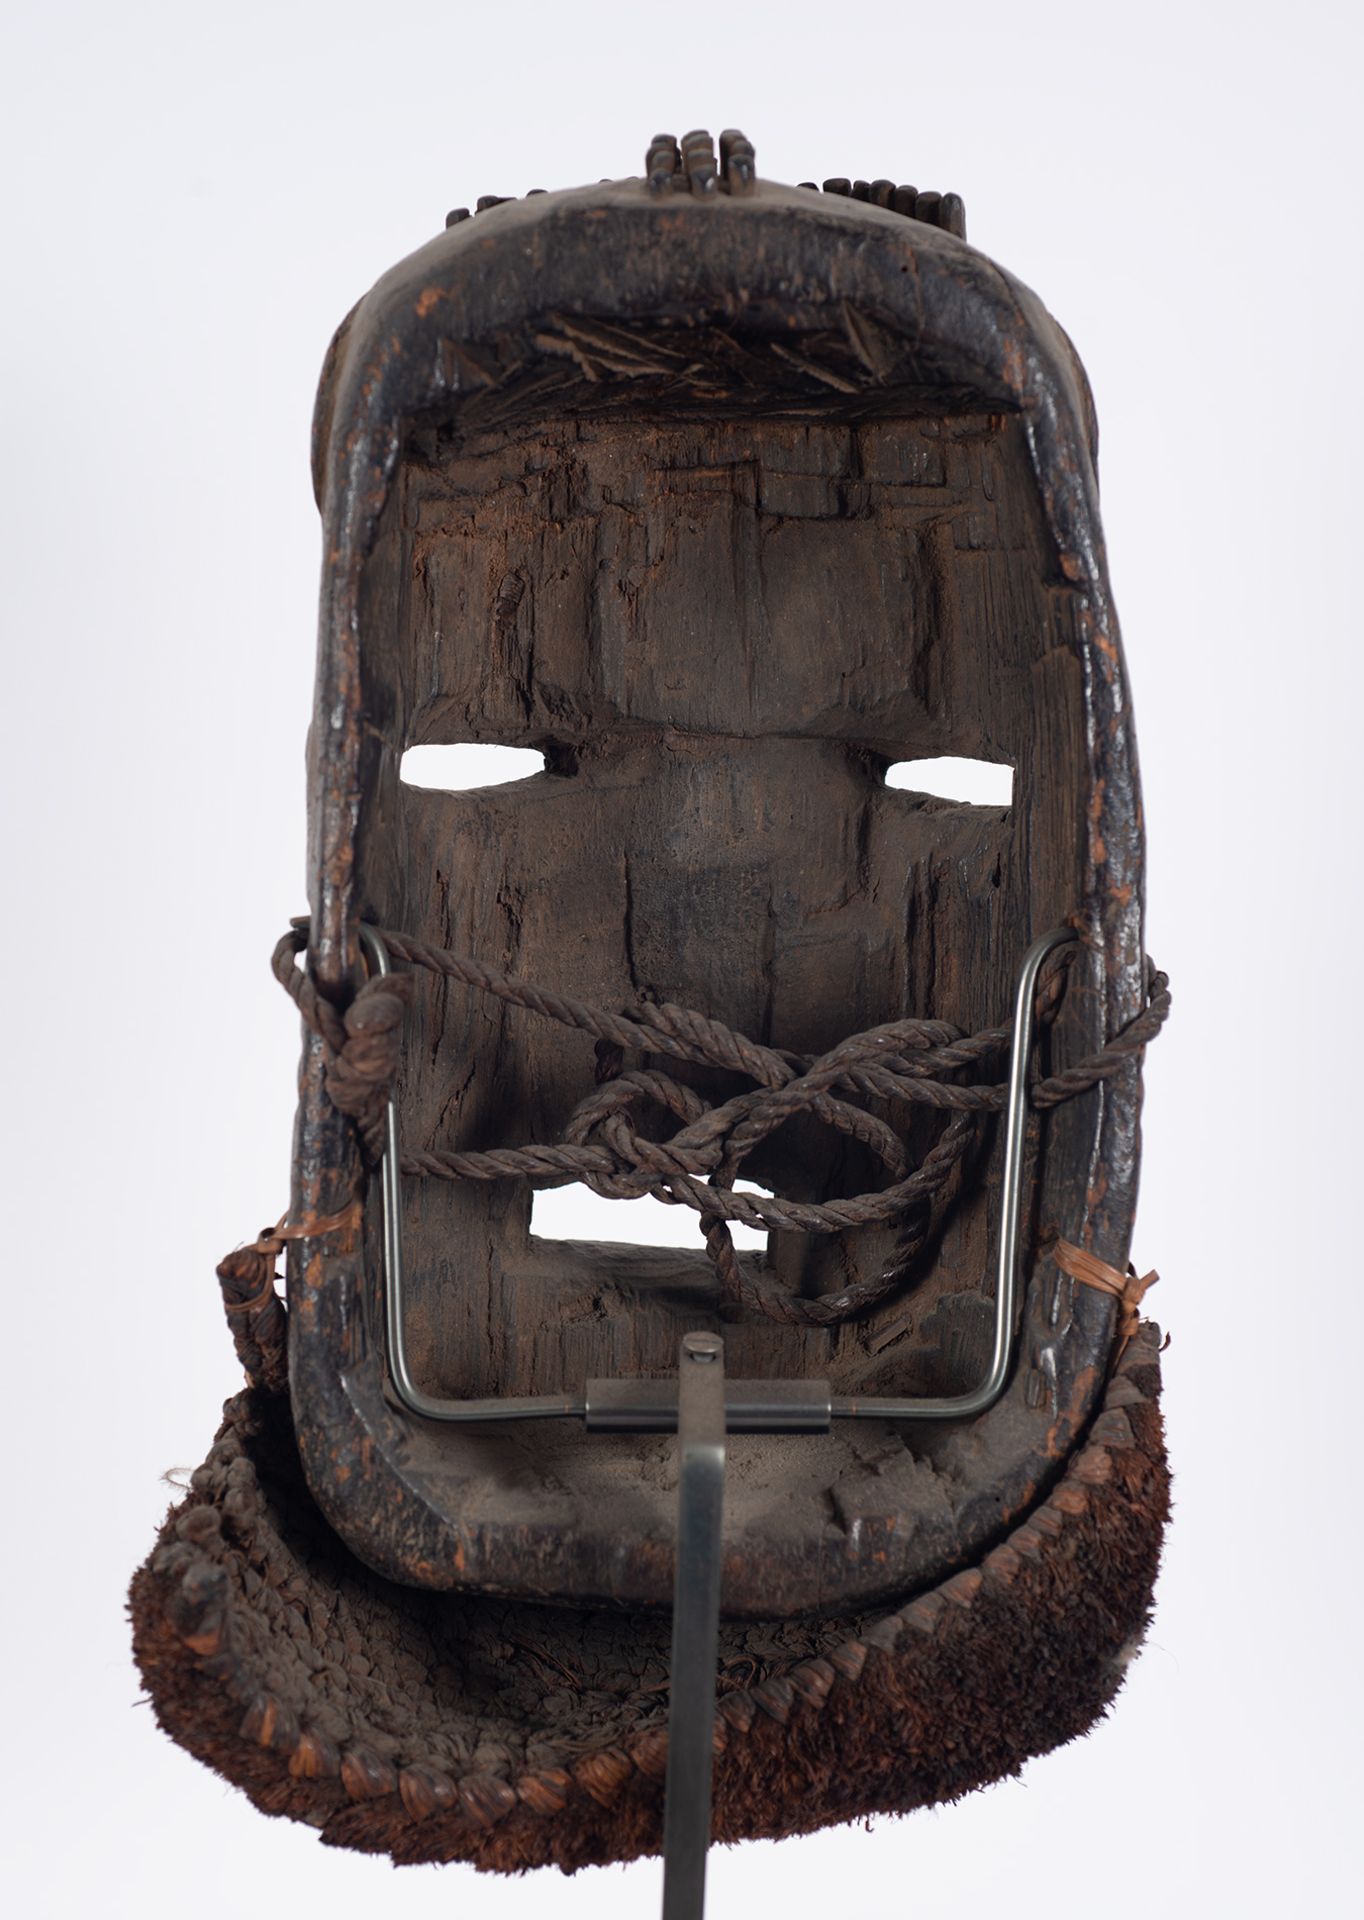 Ngbaka mask from the Congo or Niger - Bild 4 aus 7